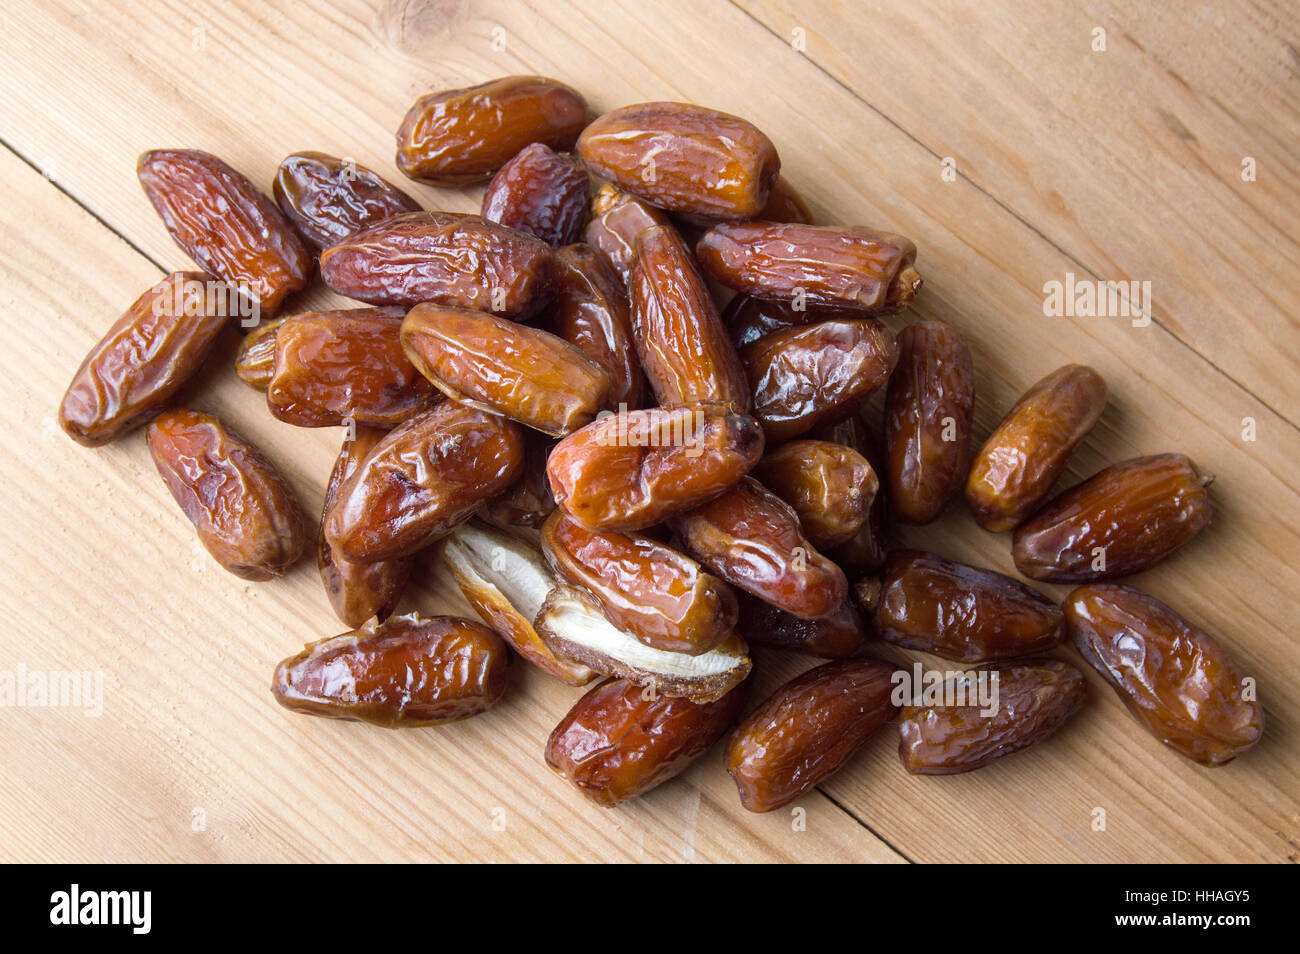 Bunch of dried date fruits on wooden table Stock Photo